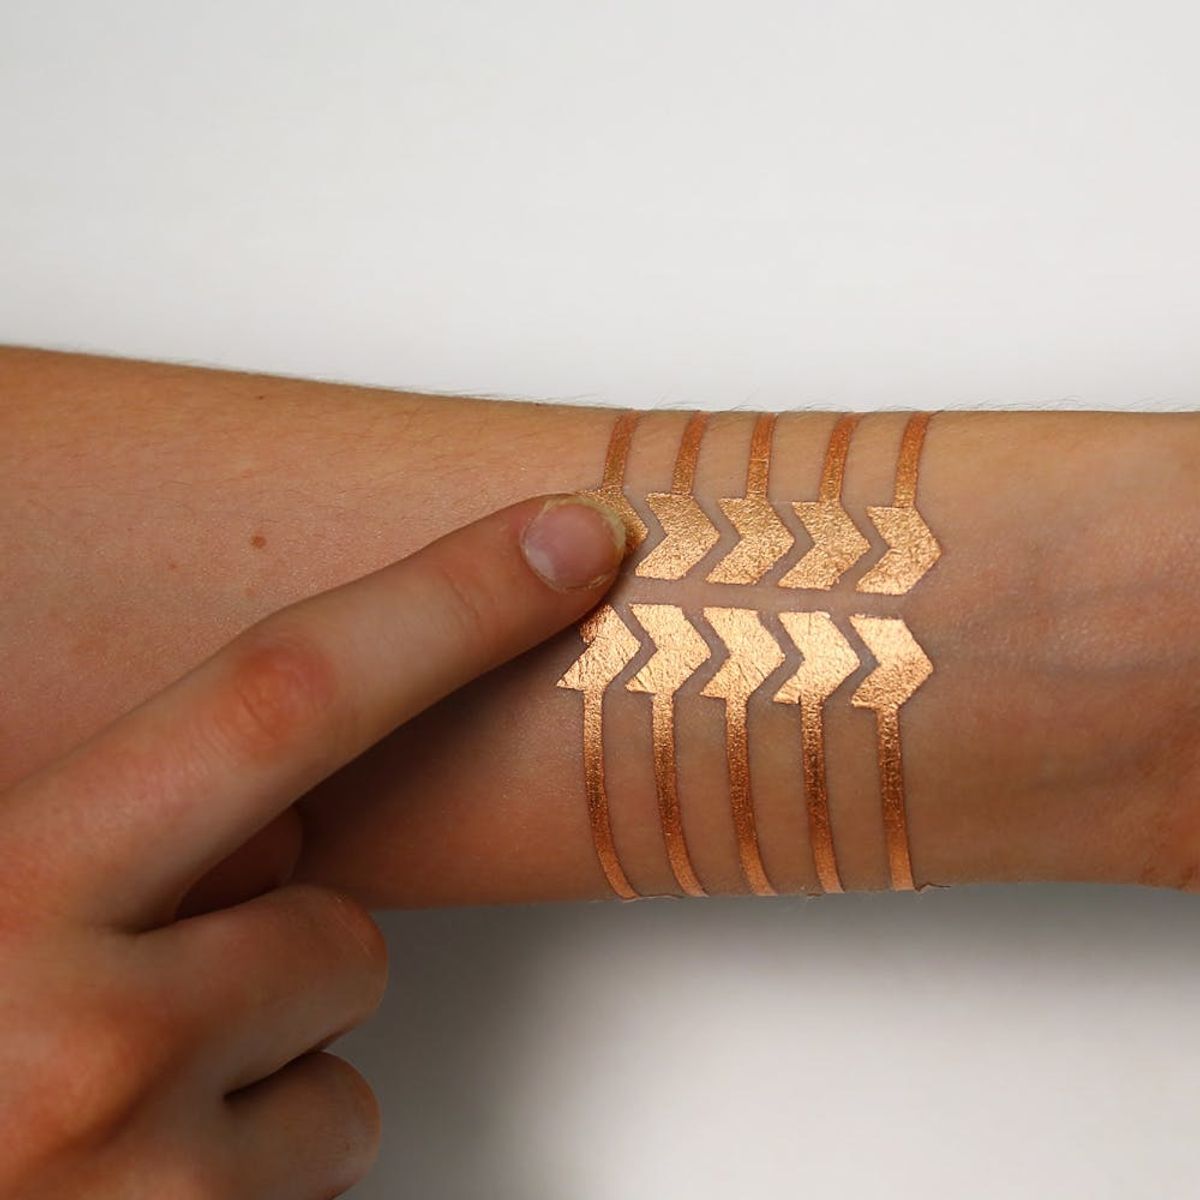 In the Future, We’ll Control Our Phones With Beautiful Gold Tattoos